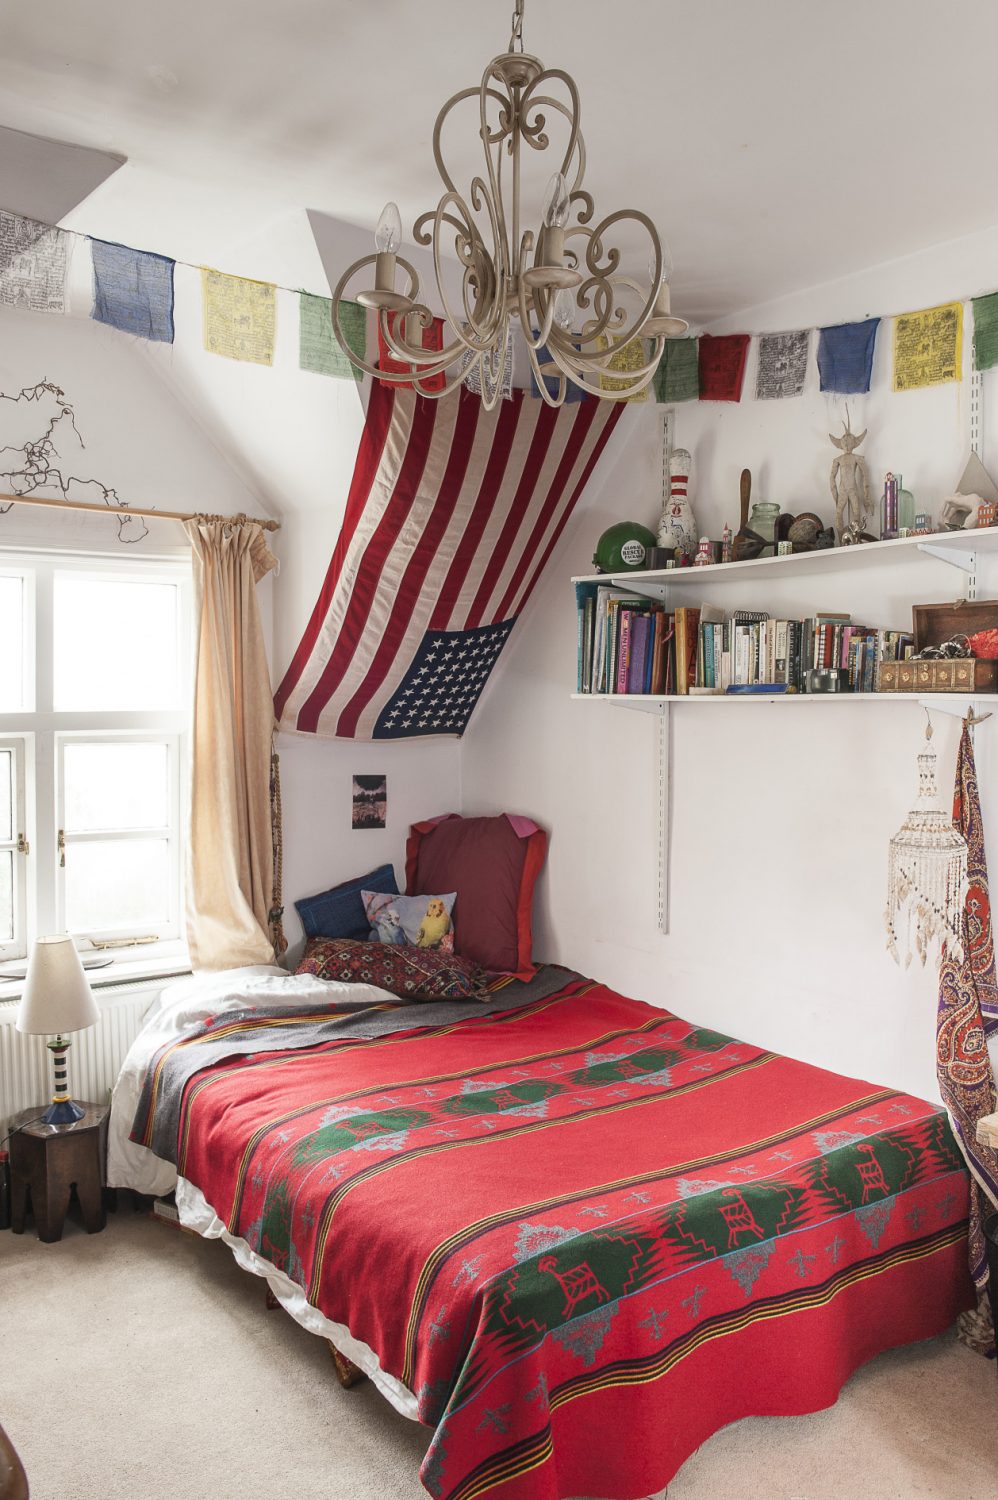 Alli’s 23-year-old stepdaughter Hannah has been responsible for the décor in her own room which reflects her love of ethnic fabrics, art and curios